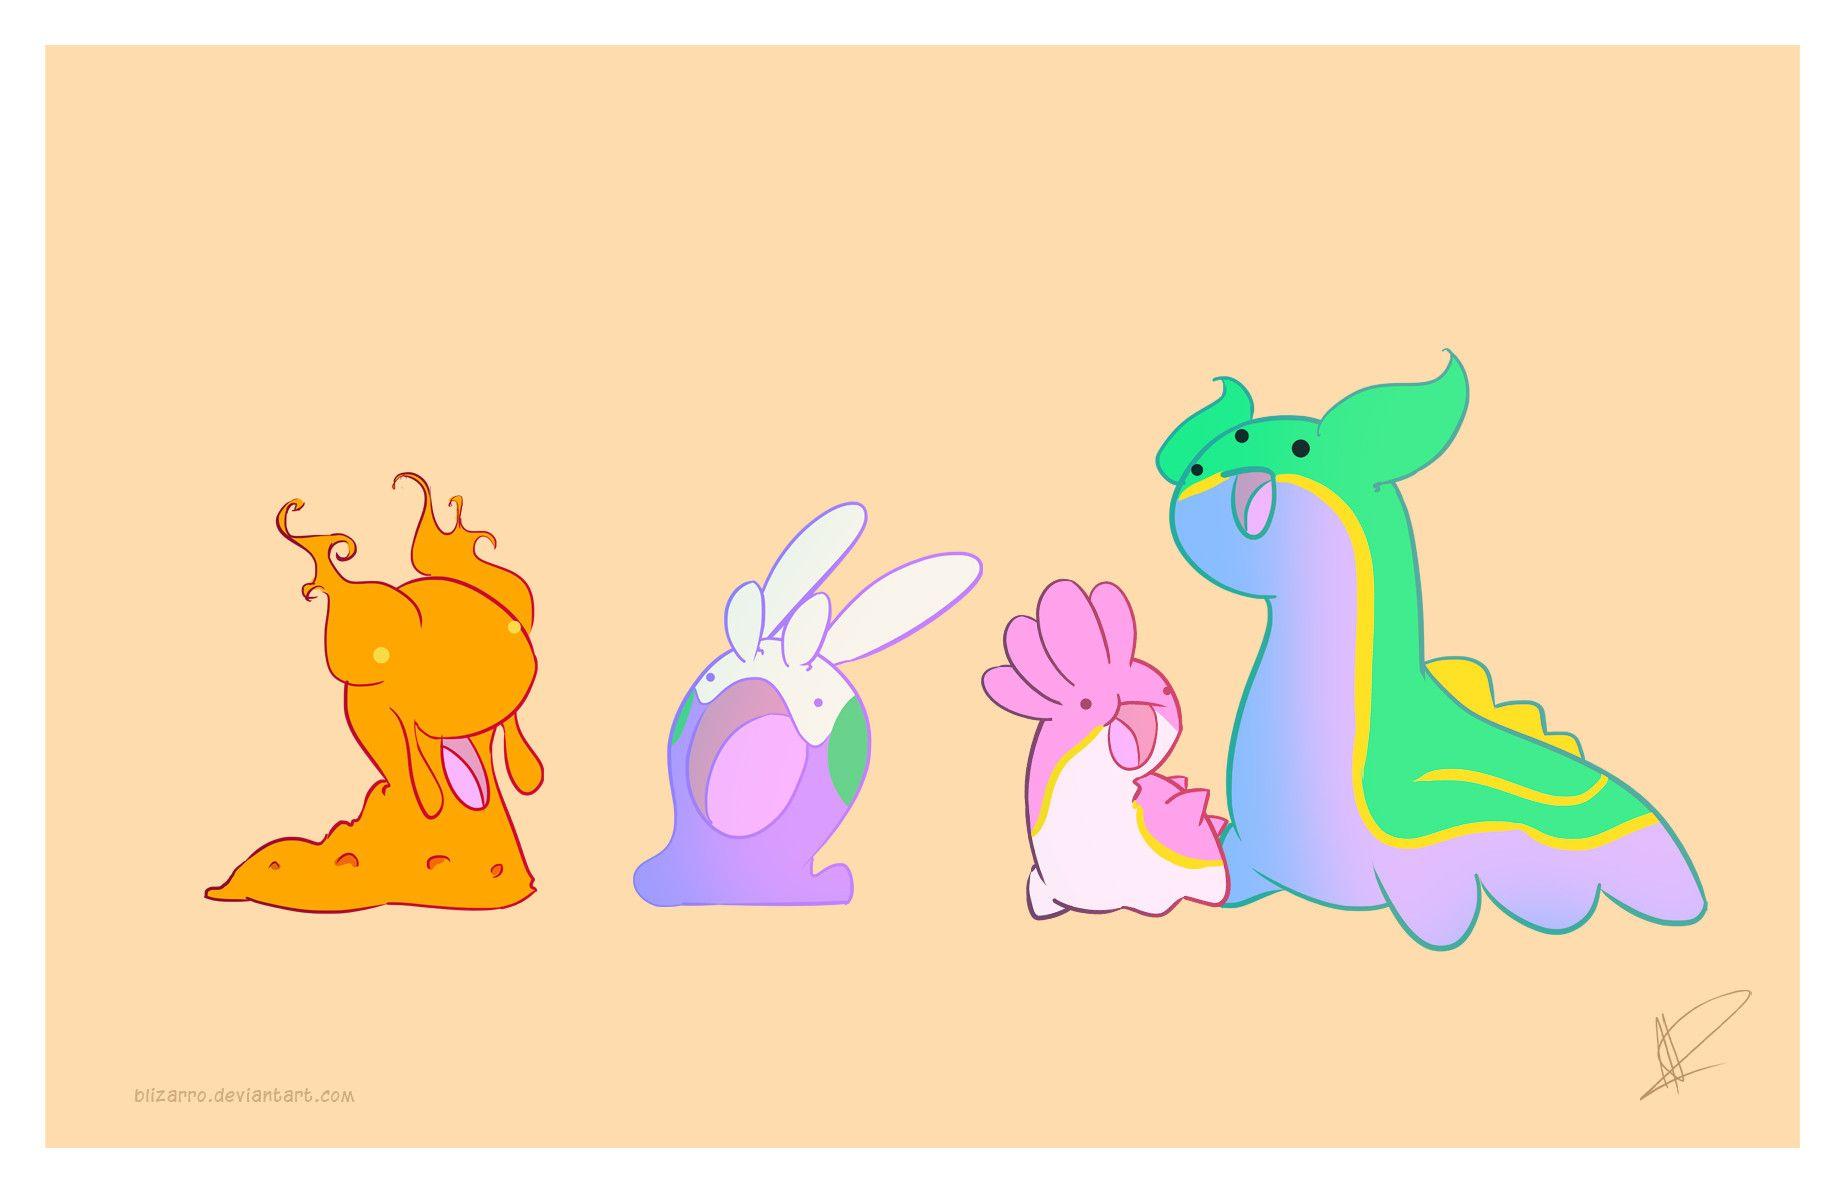 With all the Goomy love here, I thought I'd draw the welcoming party